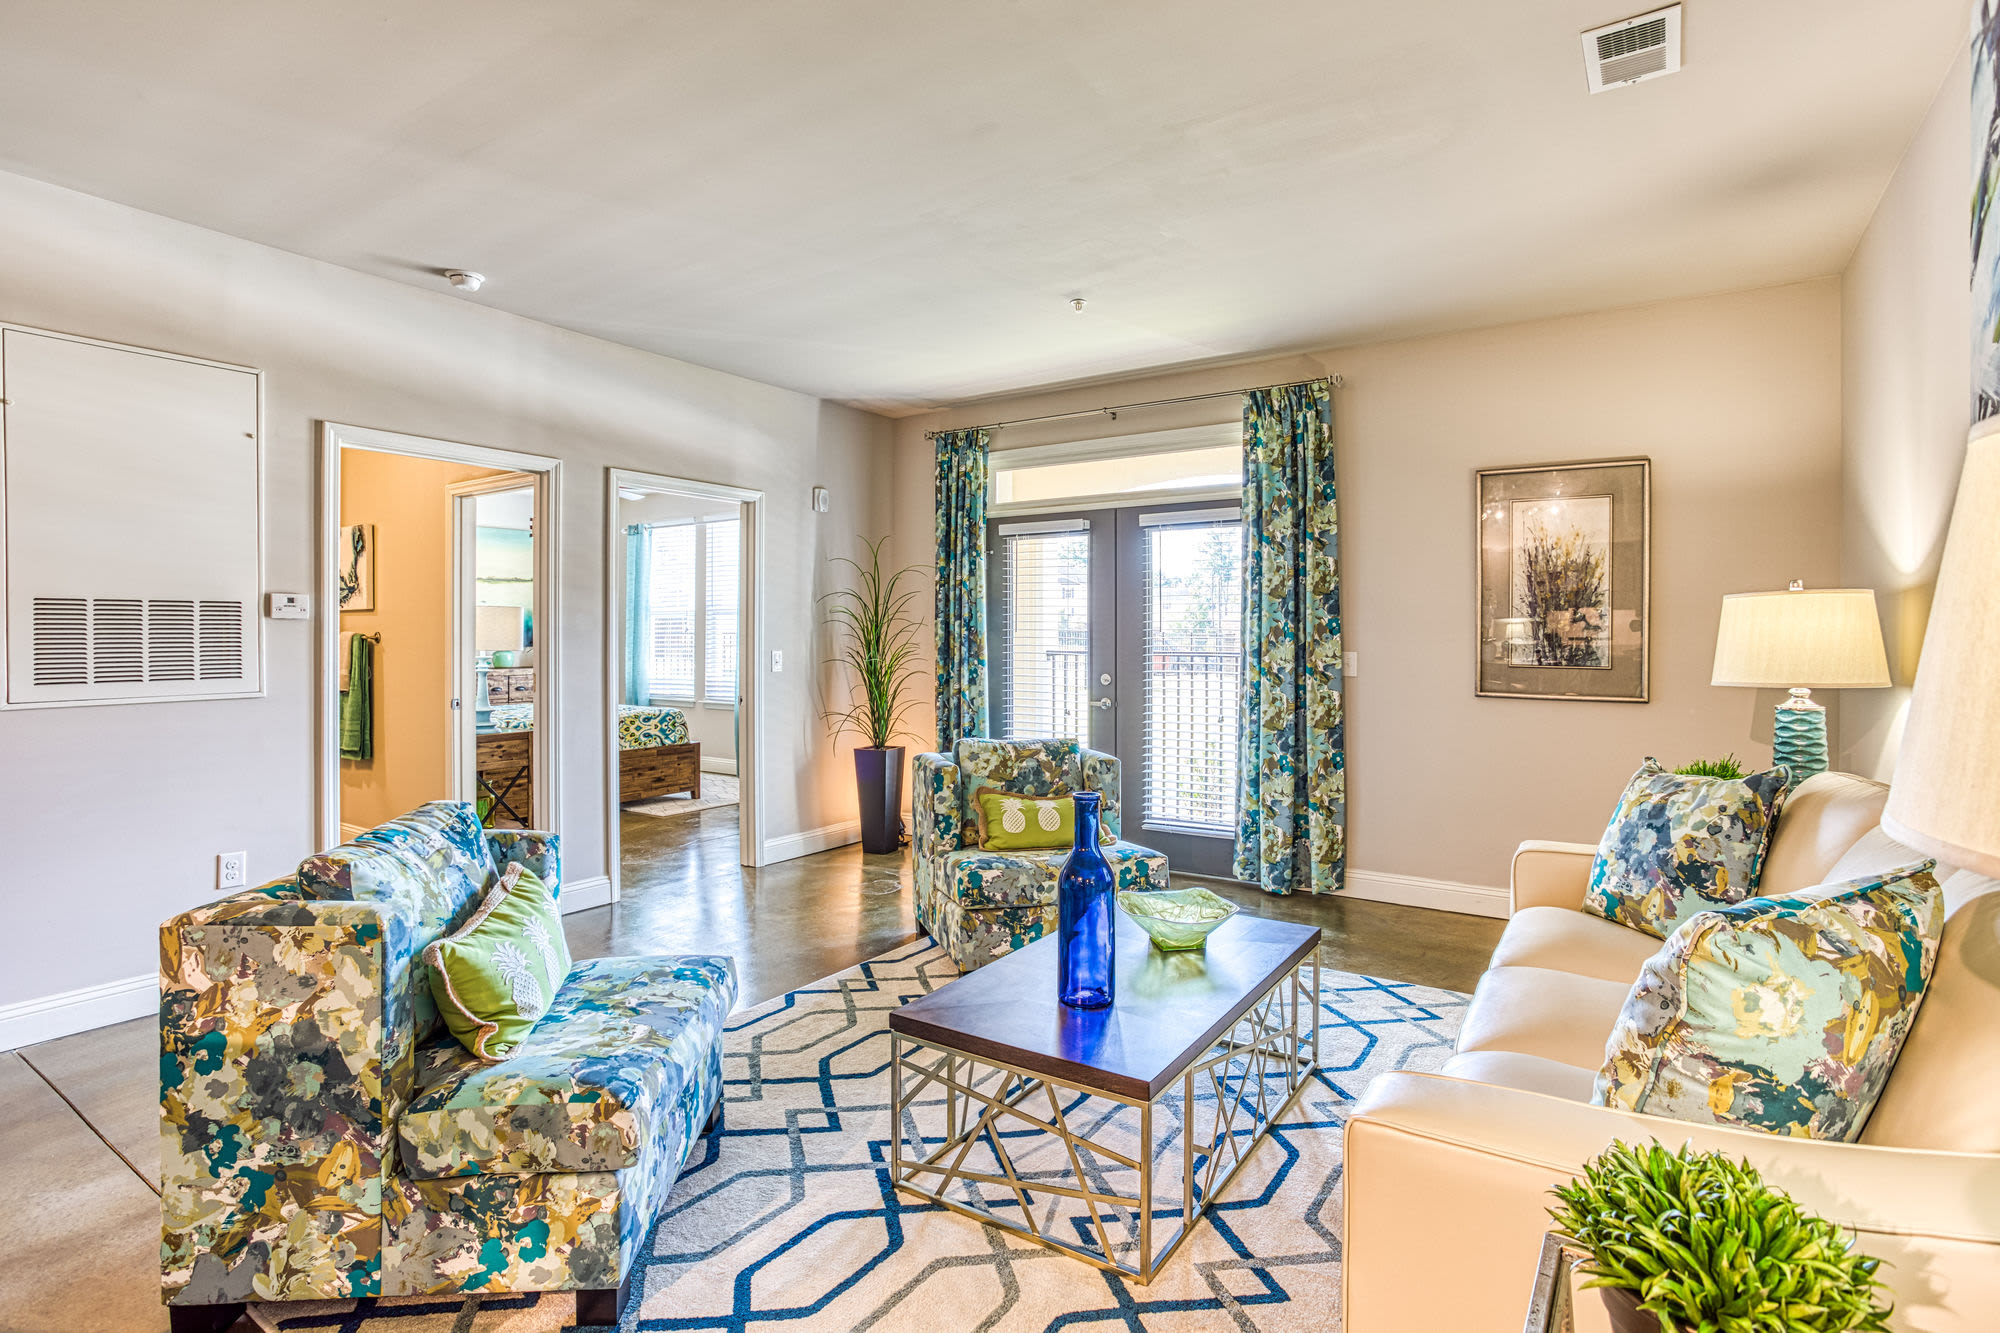 Cozy living room at Beckstone Apartments in Summerville, South Carolina